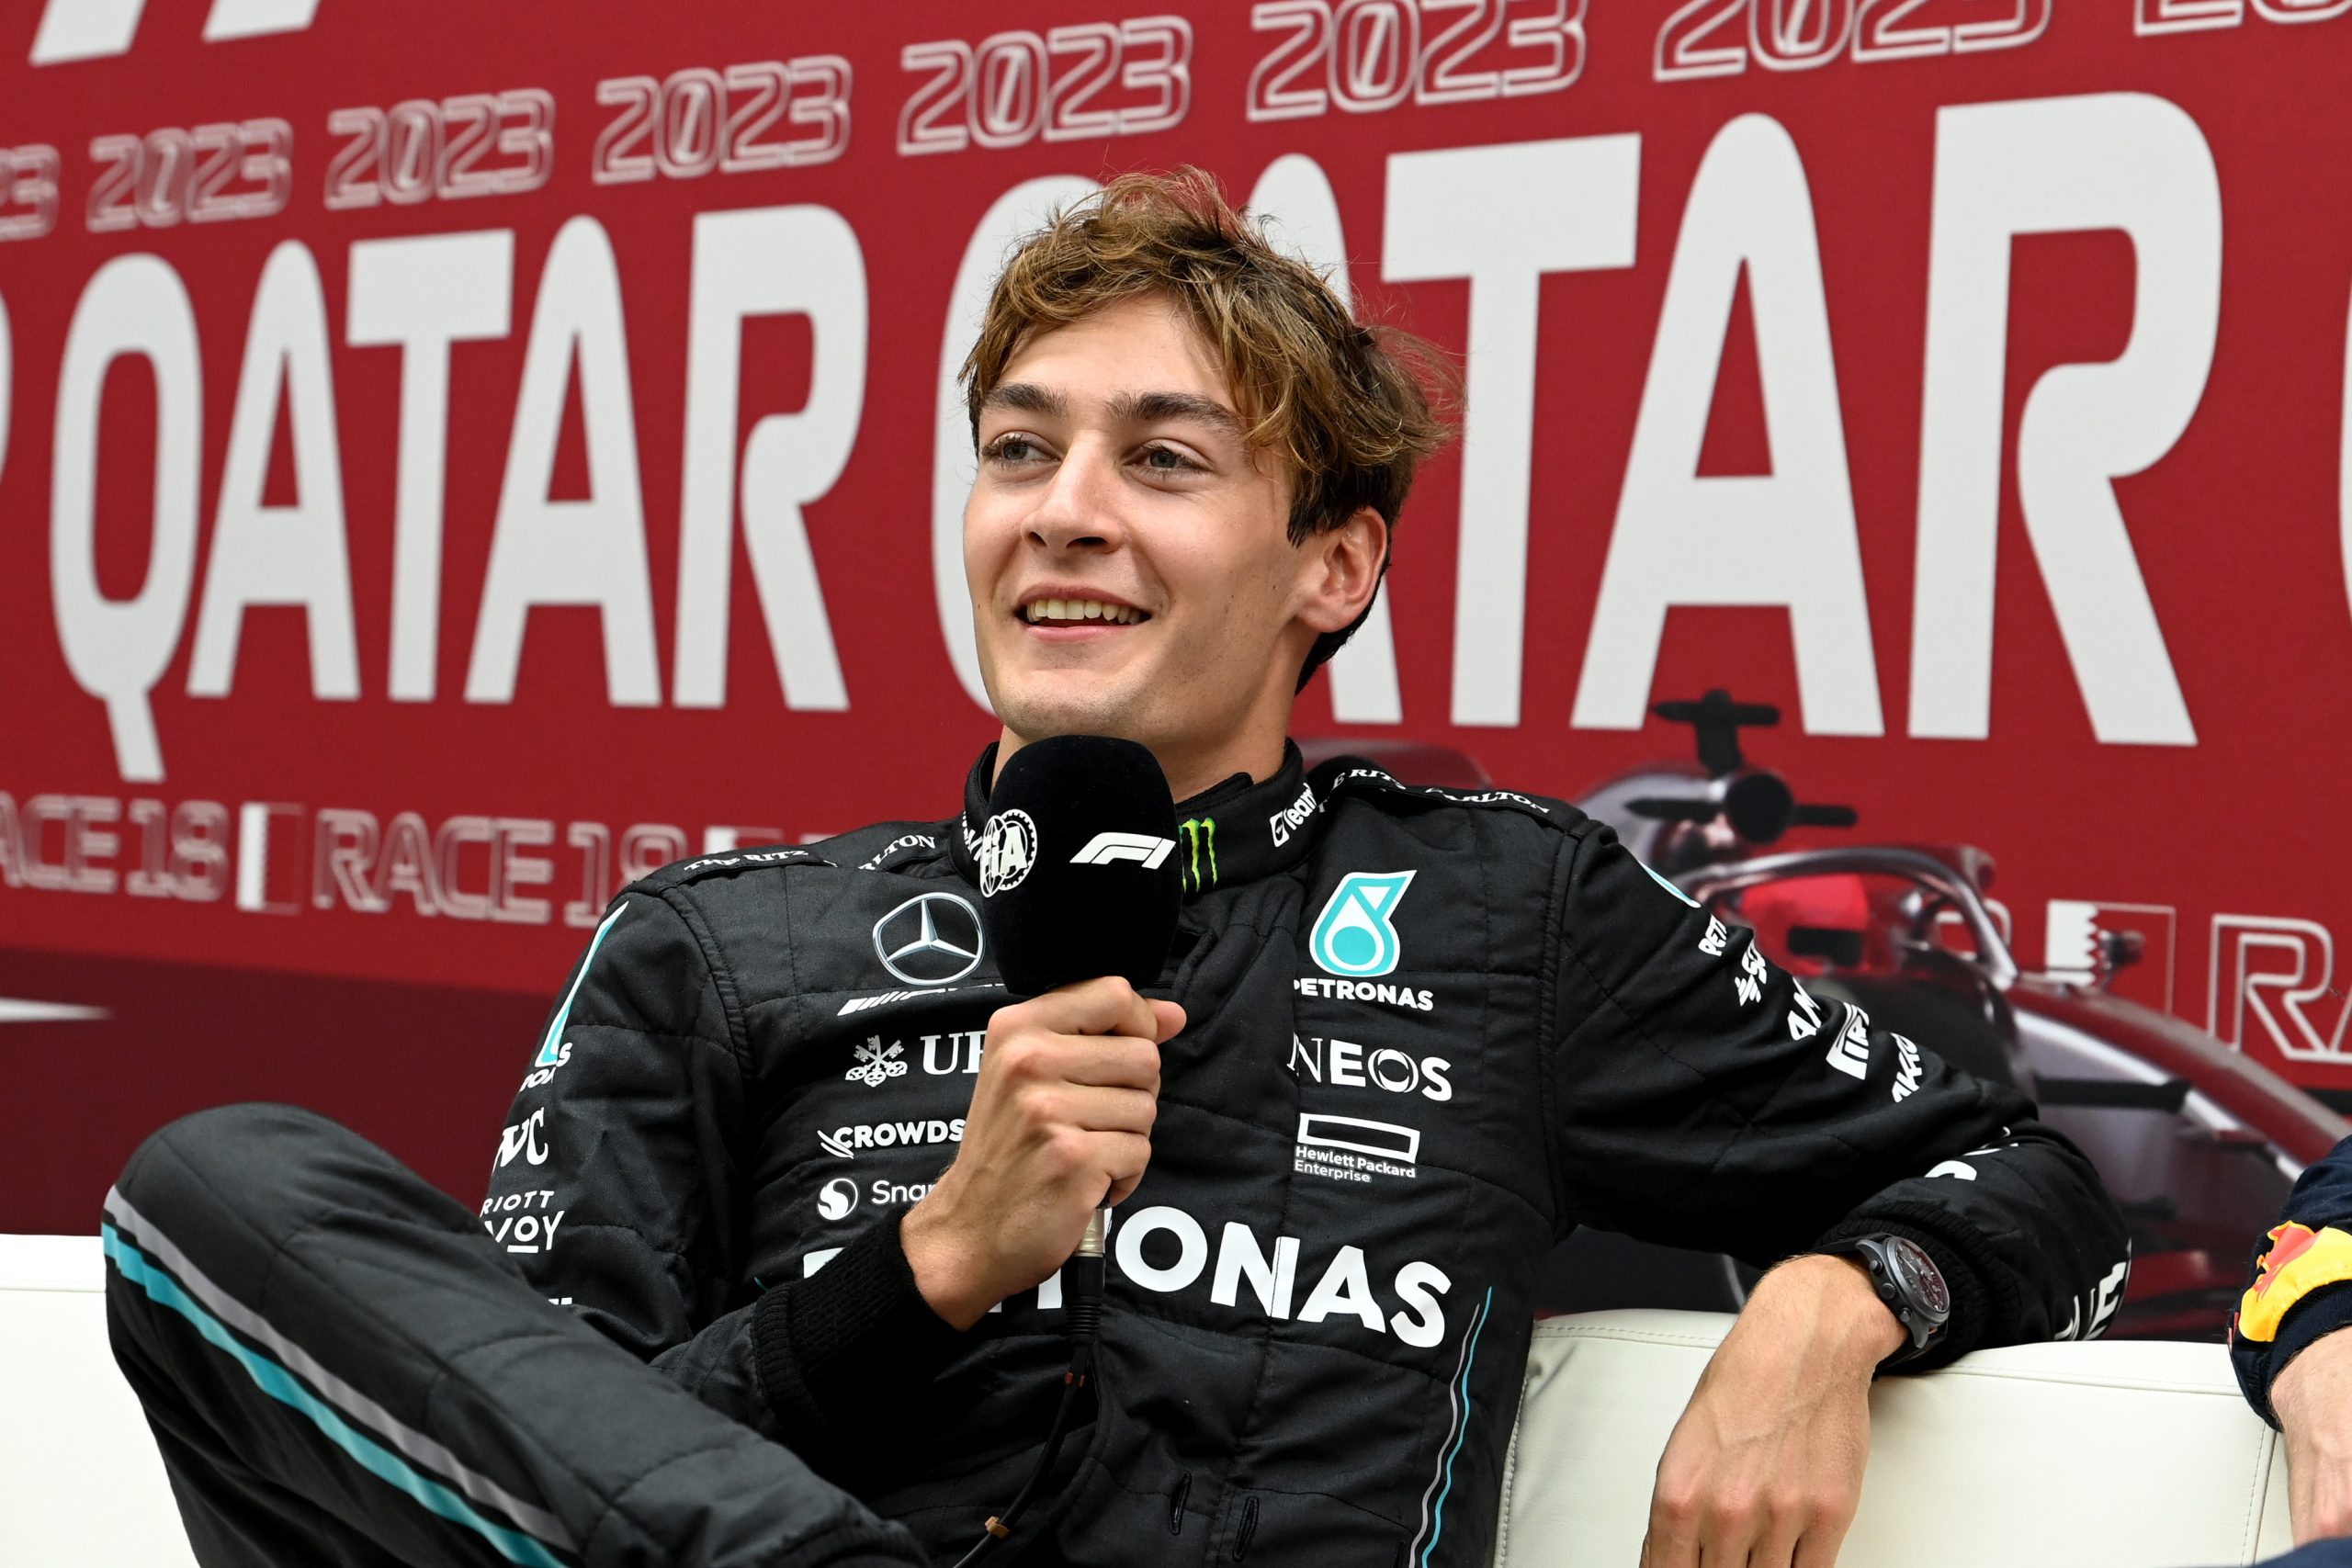 George Russell: Mercedes had pace to fight Verstappen in Qatar